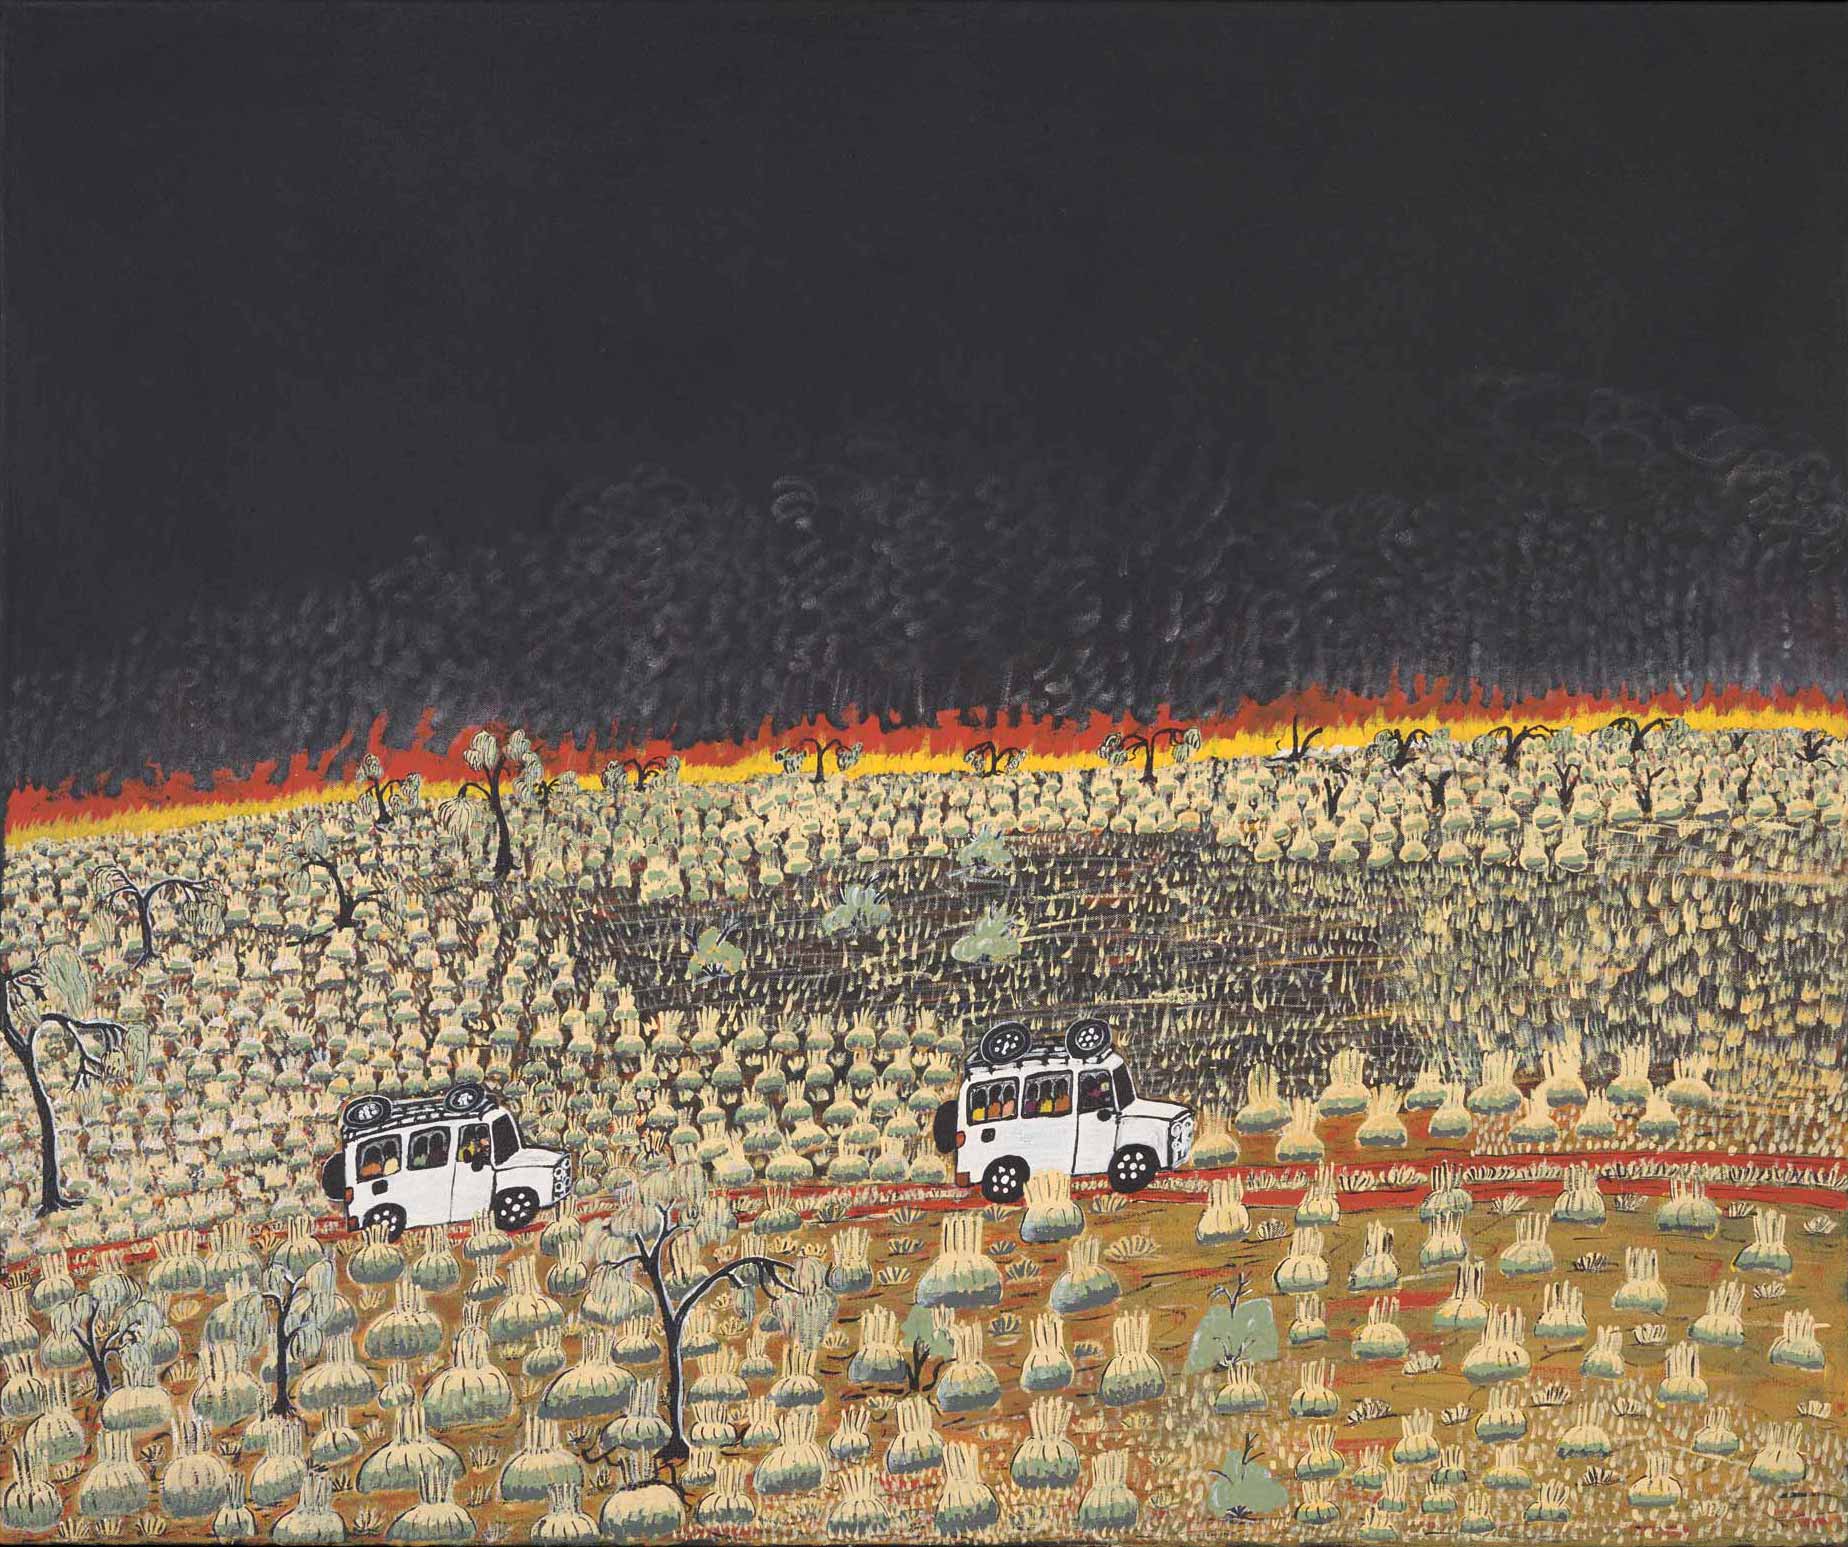 A painting depicting a black night sky, a landscape with clumps of grass and a few trees and fire in the background. Across this on a red earth road there are two four-wheel drives travelling each with a number of passengers inside and luggage on the roof.